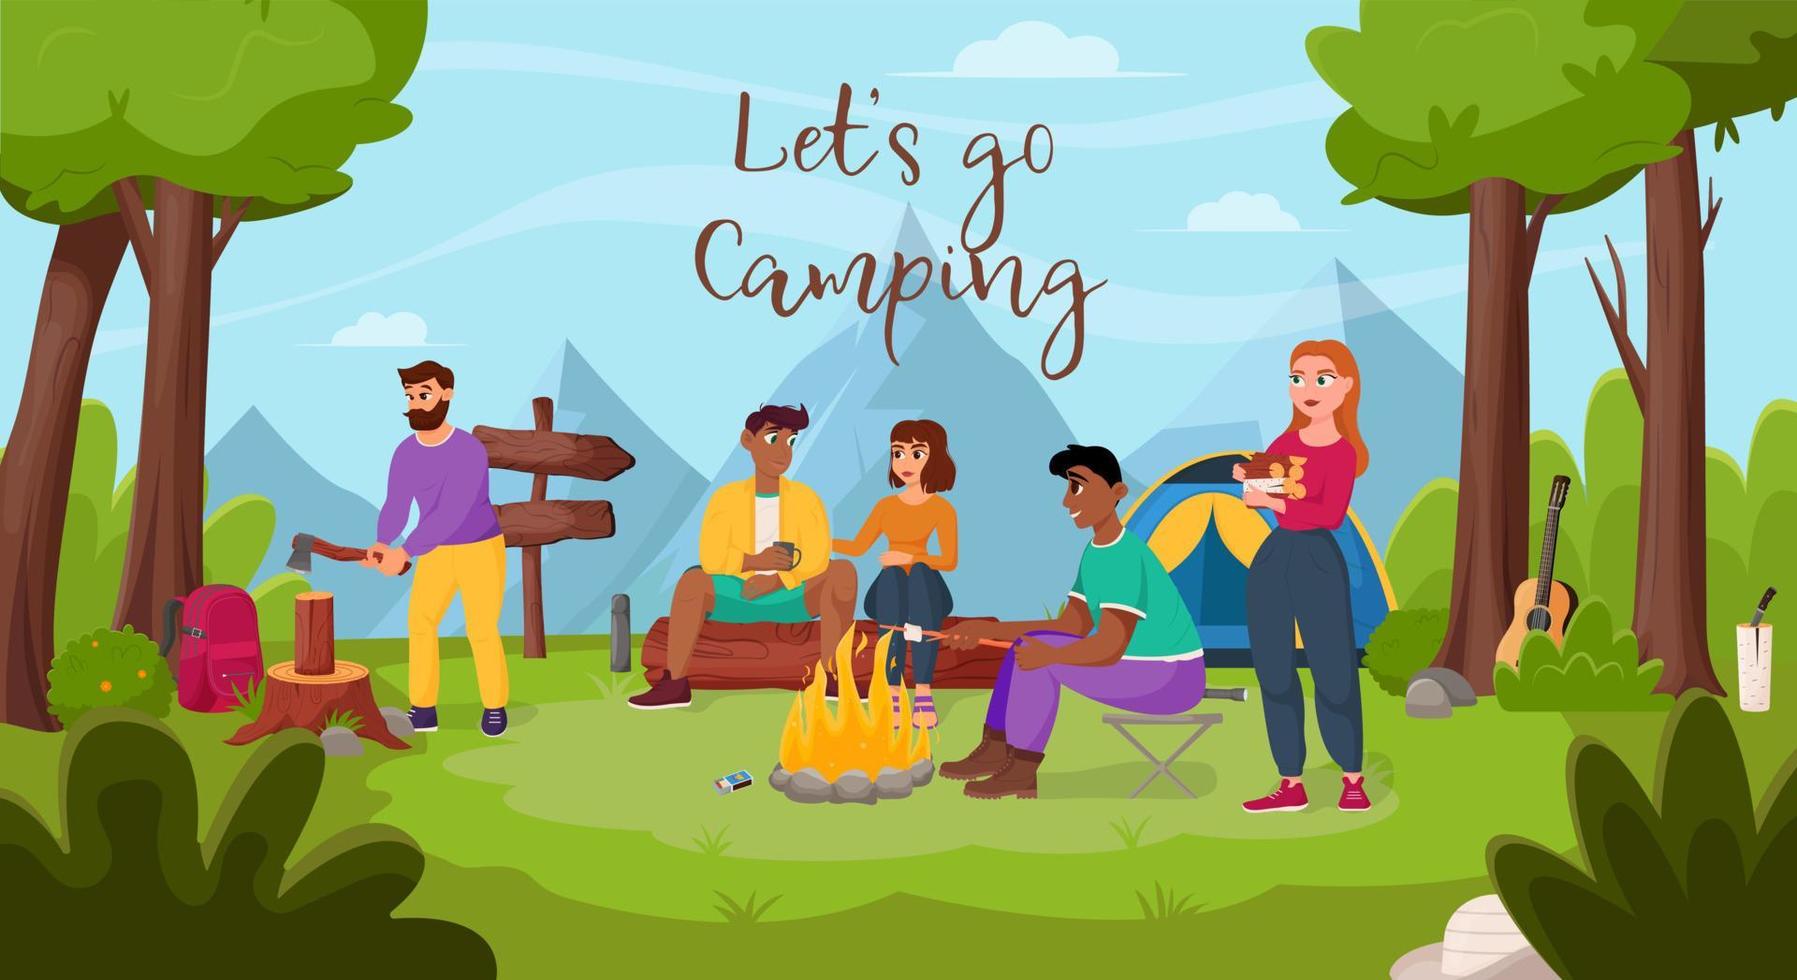 Friends relax in nature. Summertime camping, hiking, camper, adventure time concept. Flat vector illustration for poster, banner, flyer